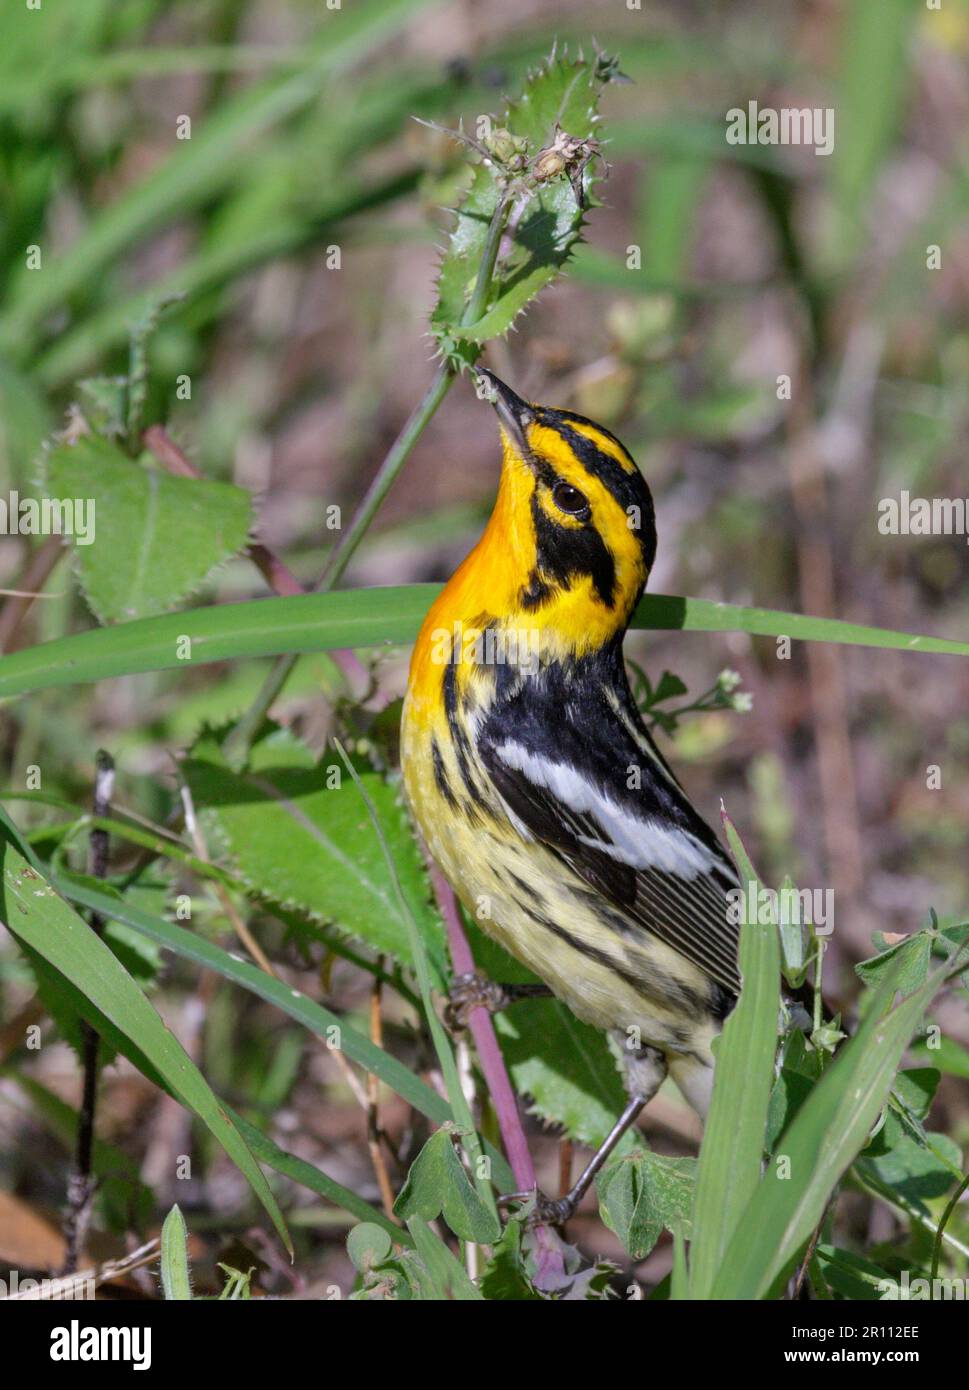 Blackburnian warbler (Setophaga fusca) catching aphids in the grass during spring migration, Galveston, Texas, USA. Stock Photo